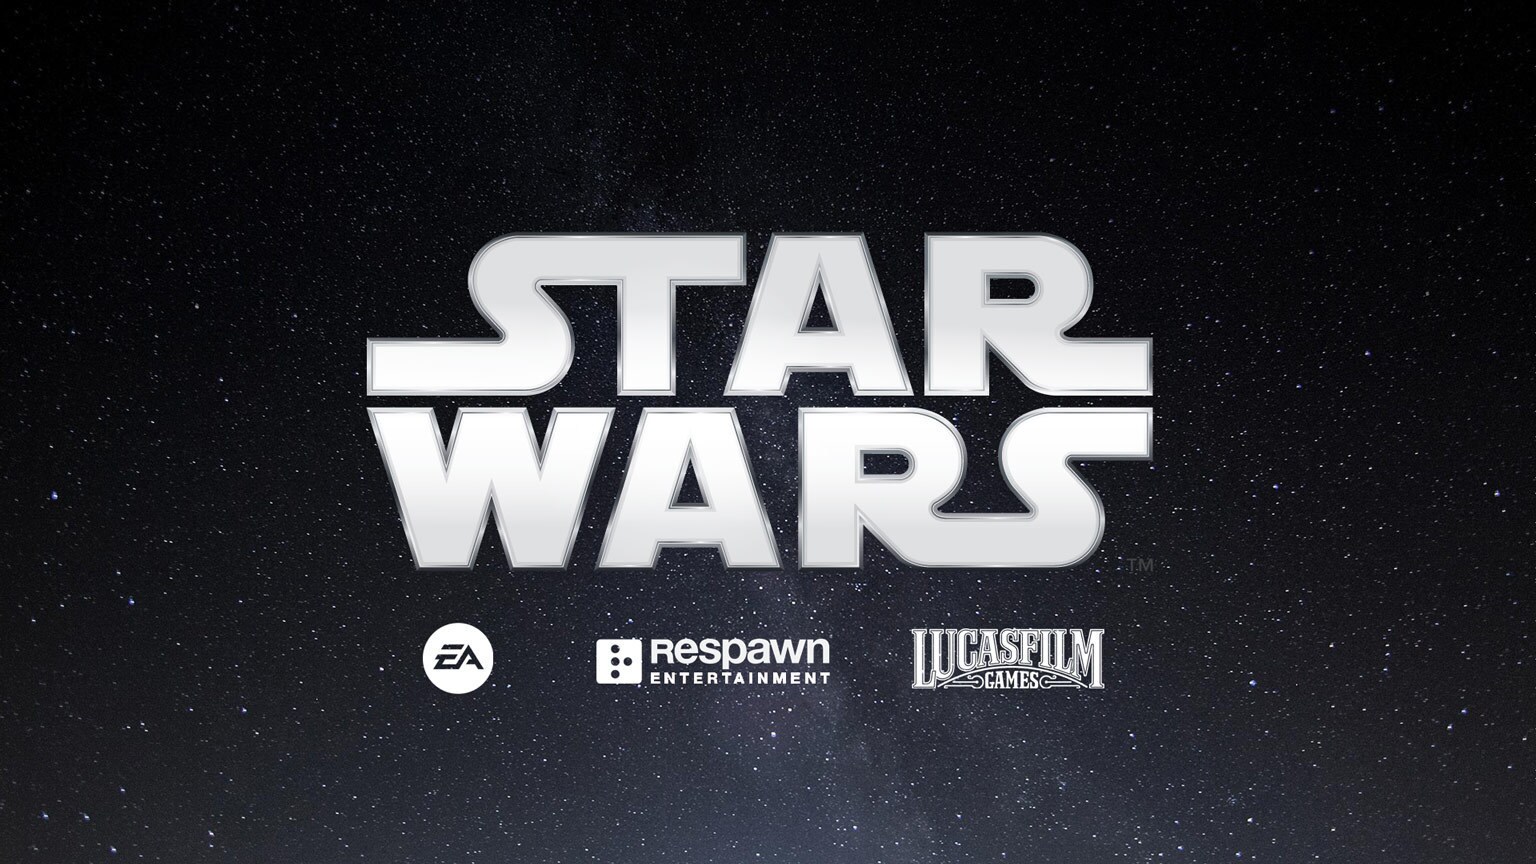 Electronic Arts and Lucasfilm Games Announce New Star Wars Titles in Development from Respawn Entertainment